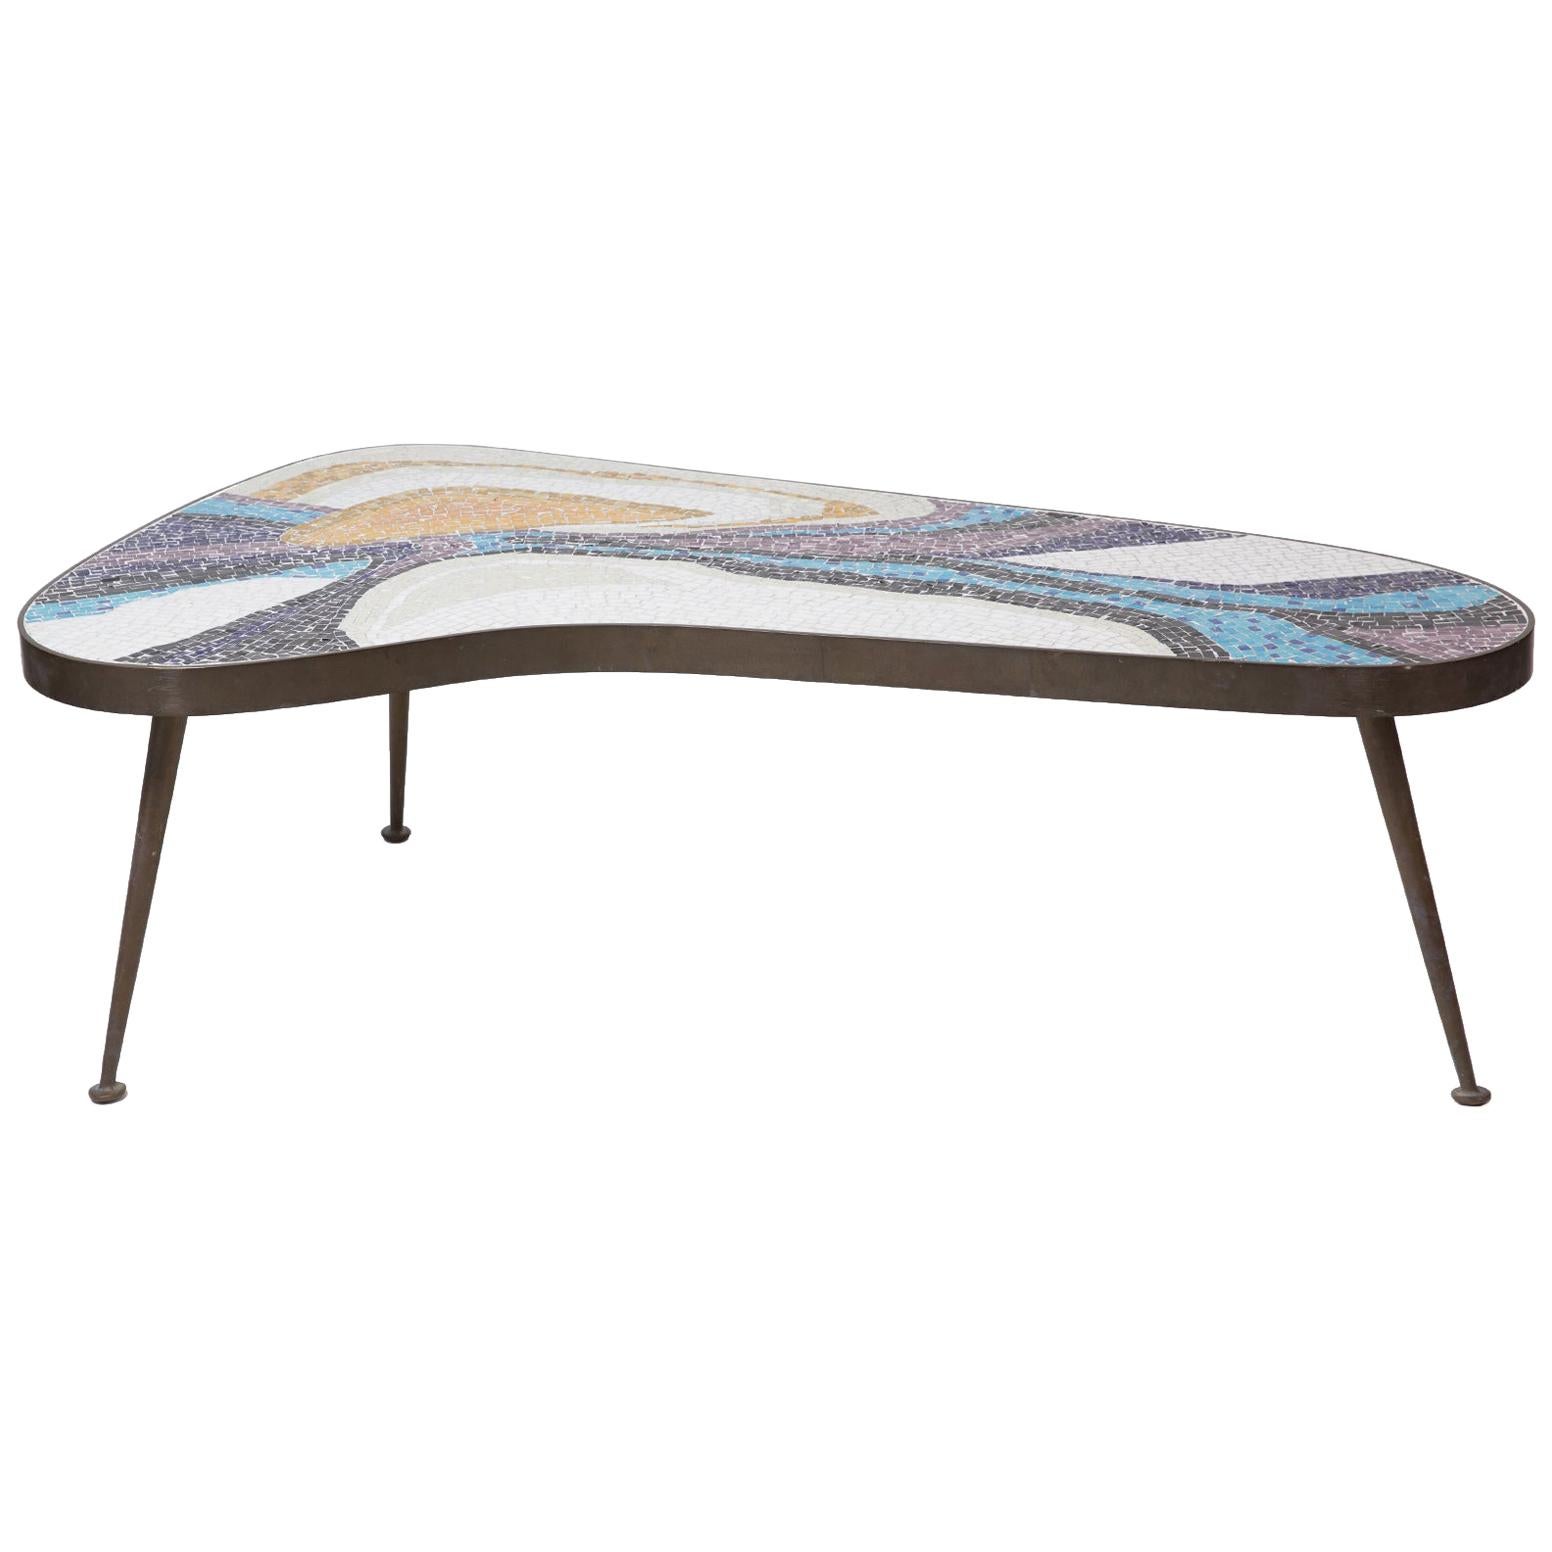 Margot Stewart Mosaic and Patinated Brass Freeform Coffee Table